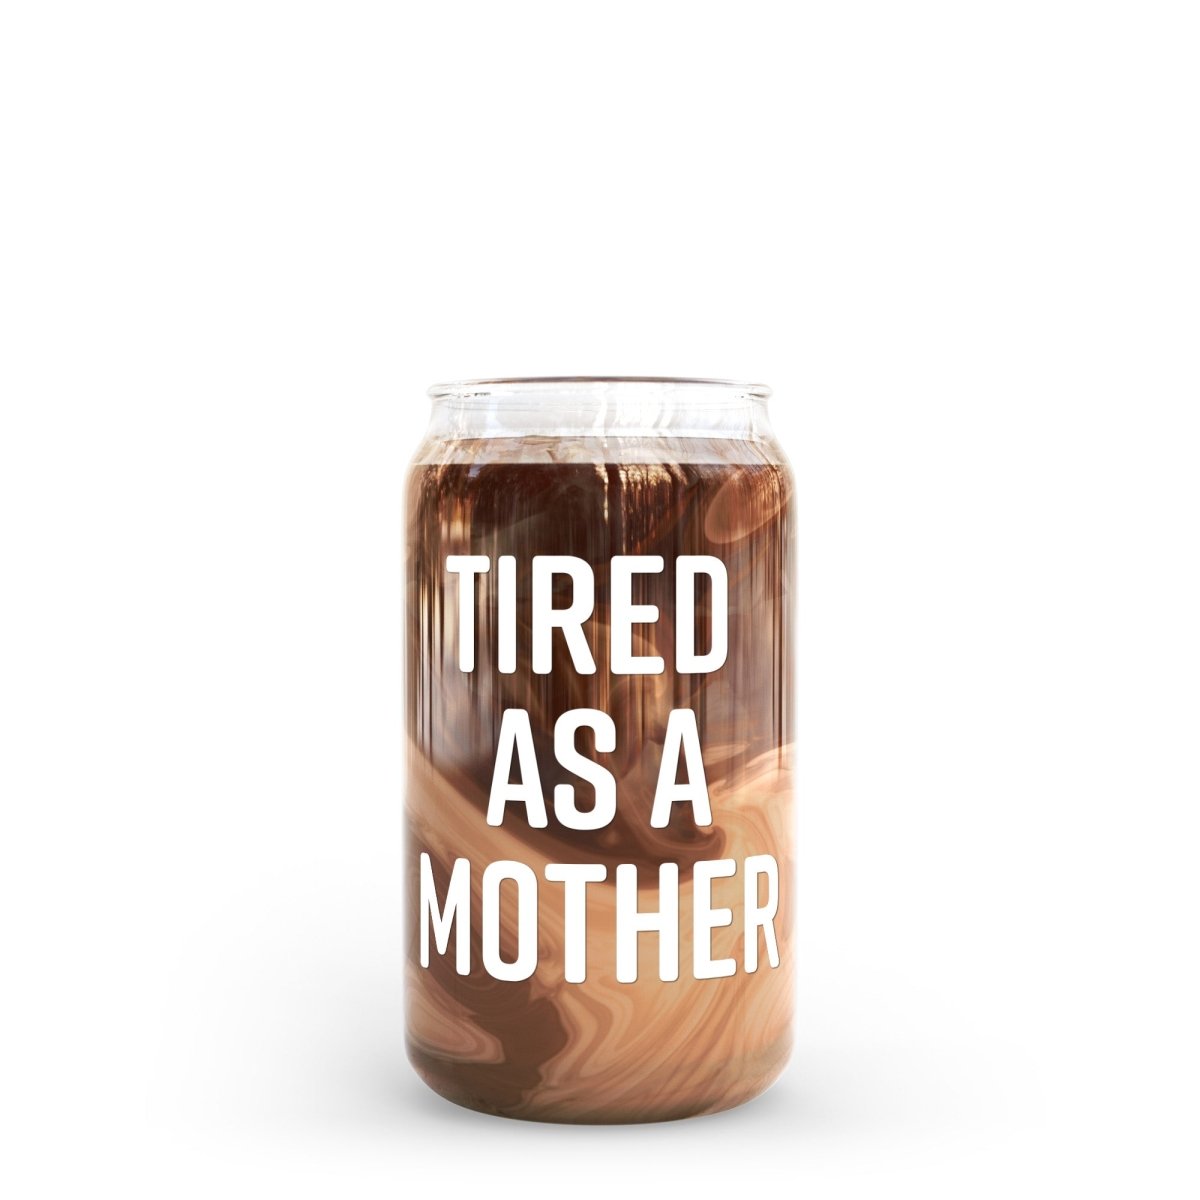 https://cdn.shopify.com/s/files/1/0534/5850/1812/products/16-oz-beer-can-glass-tired-as-a-mother-227451_1445x.jpg?v=1664477478